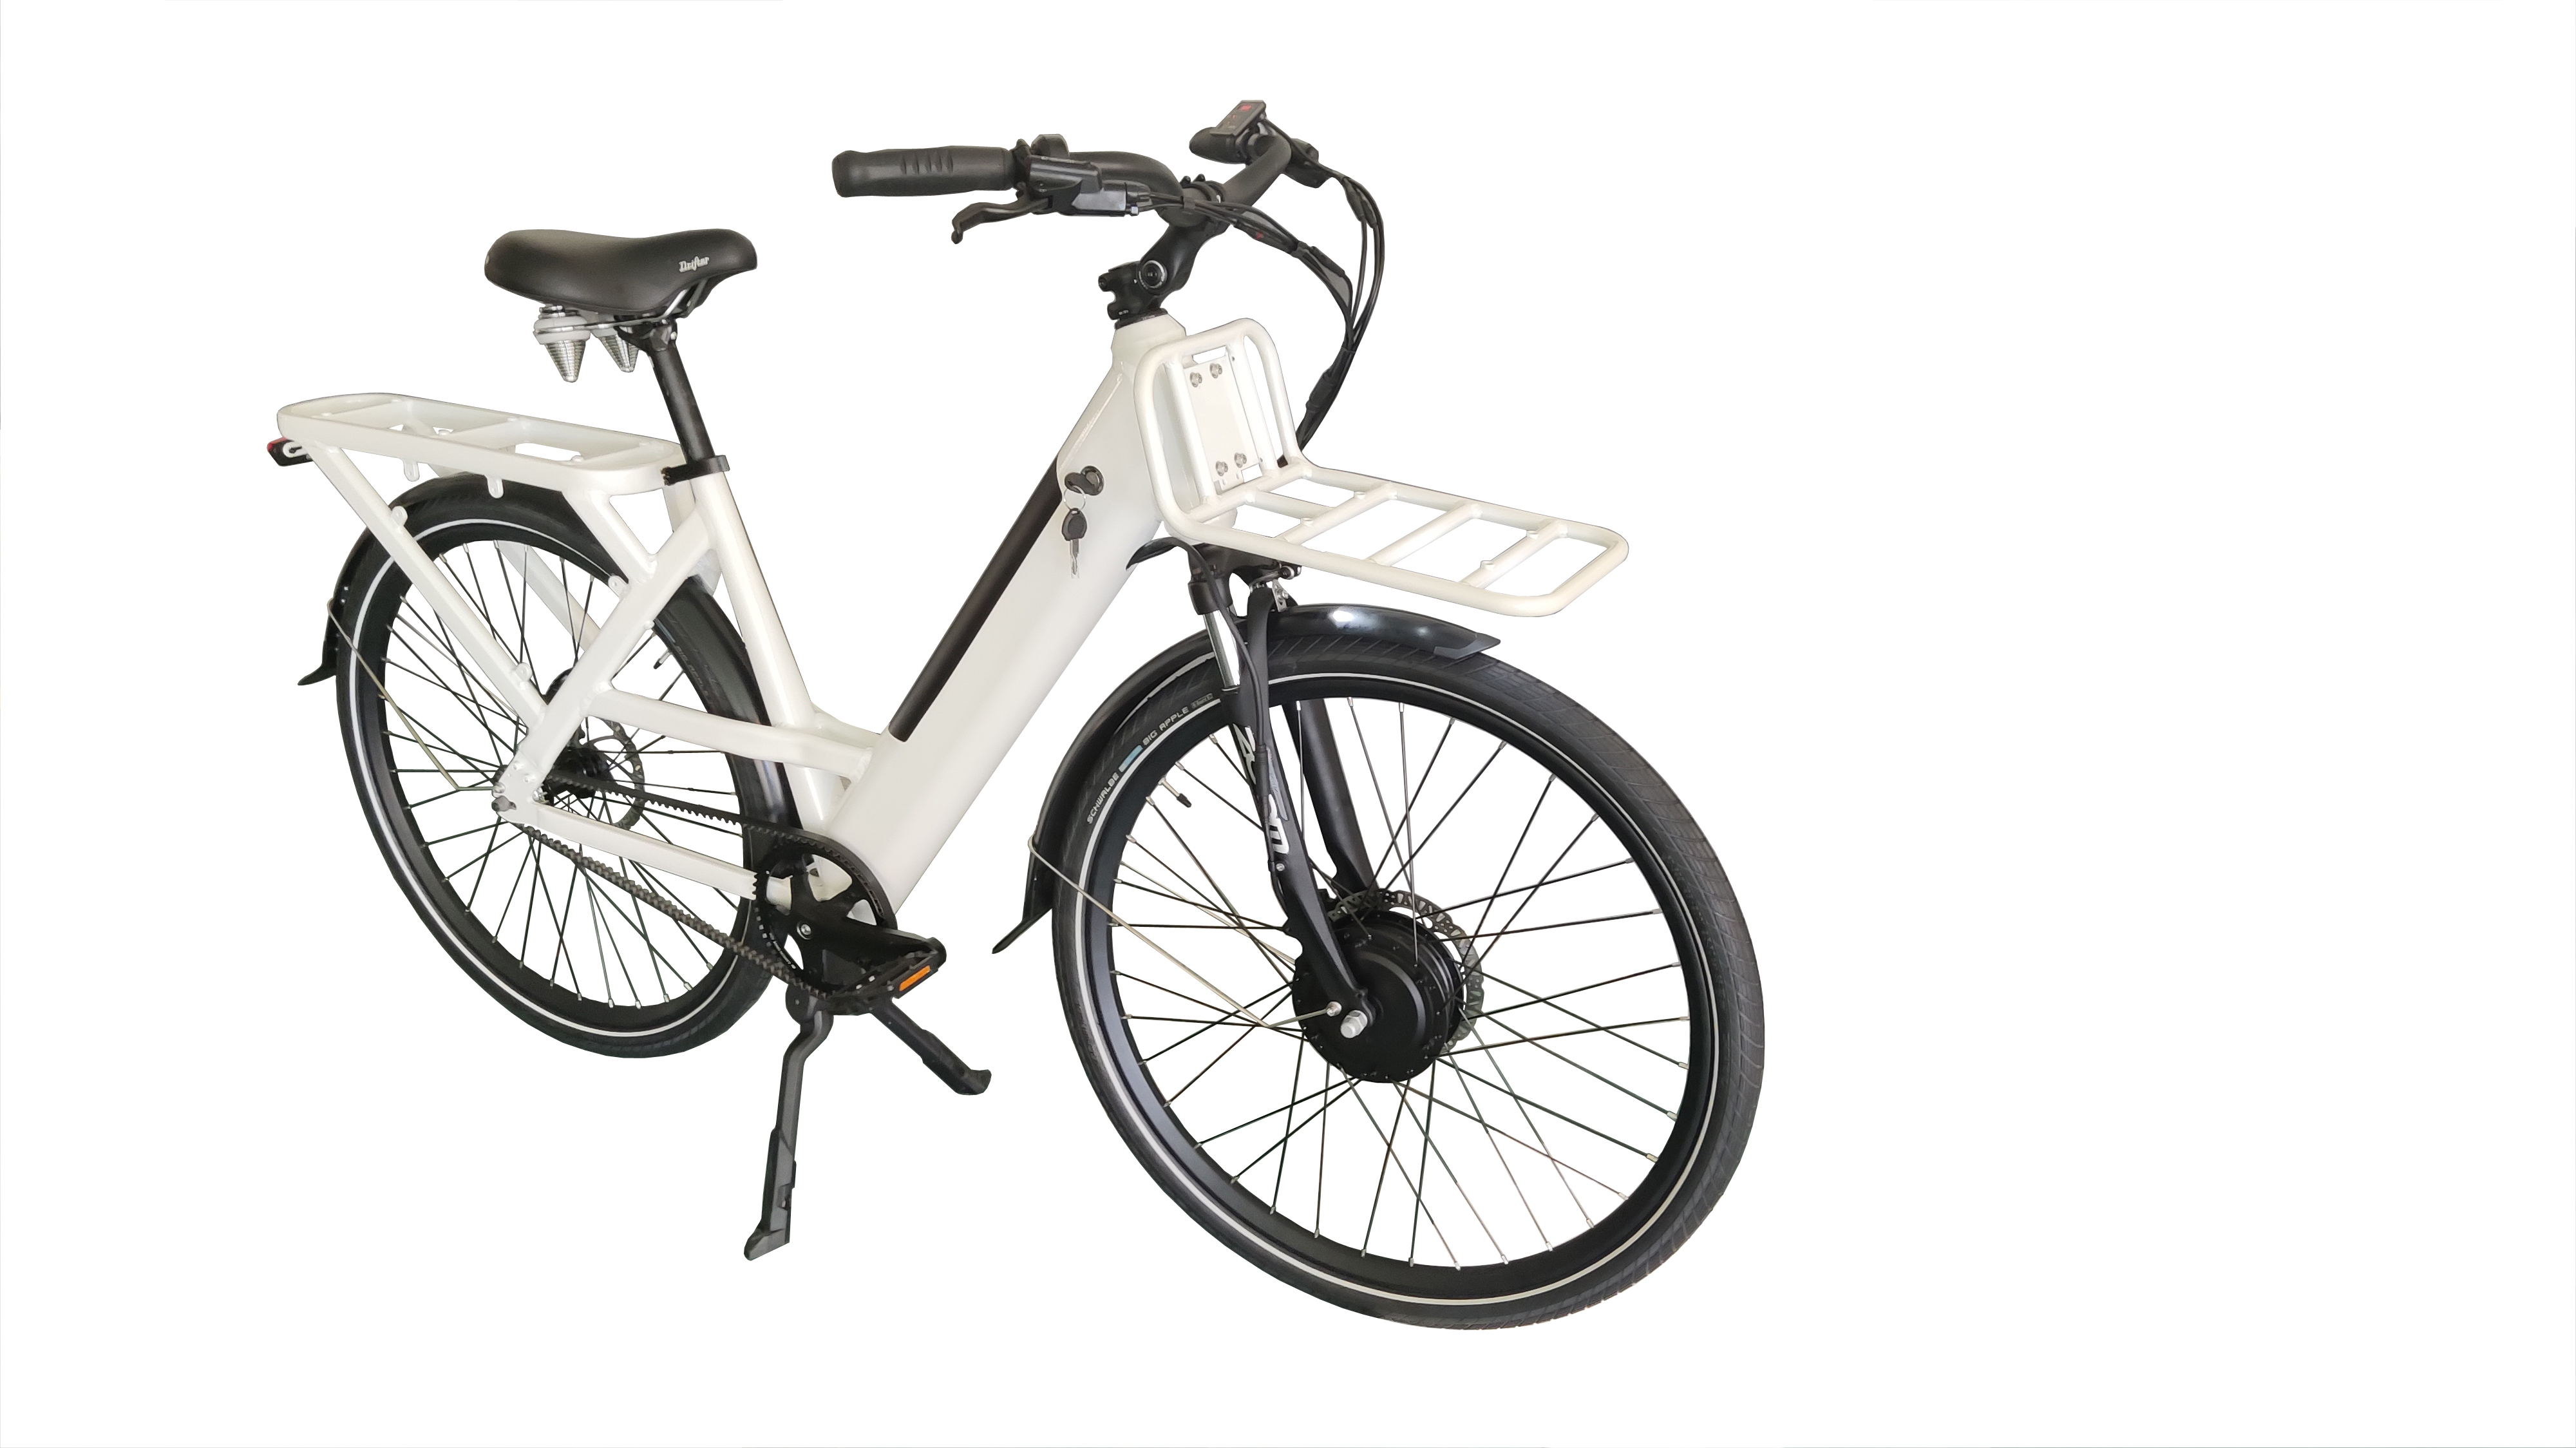 Delivery ebike steel frame and 36V-350W front motor, PRO